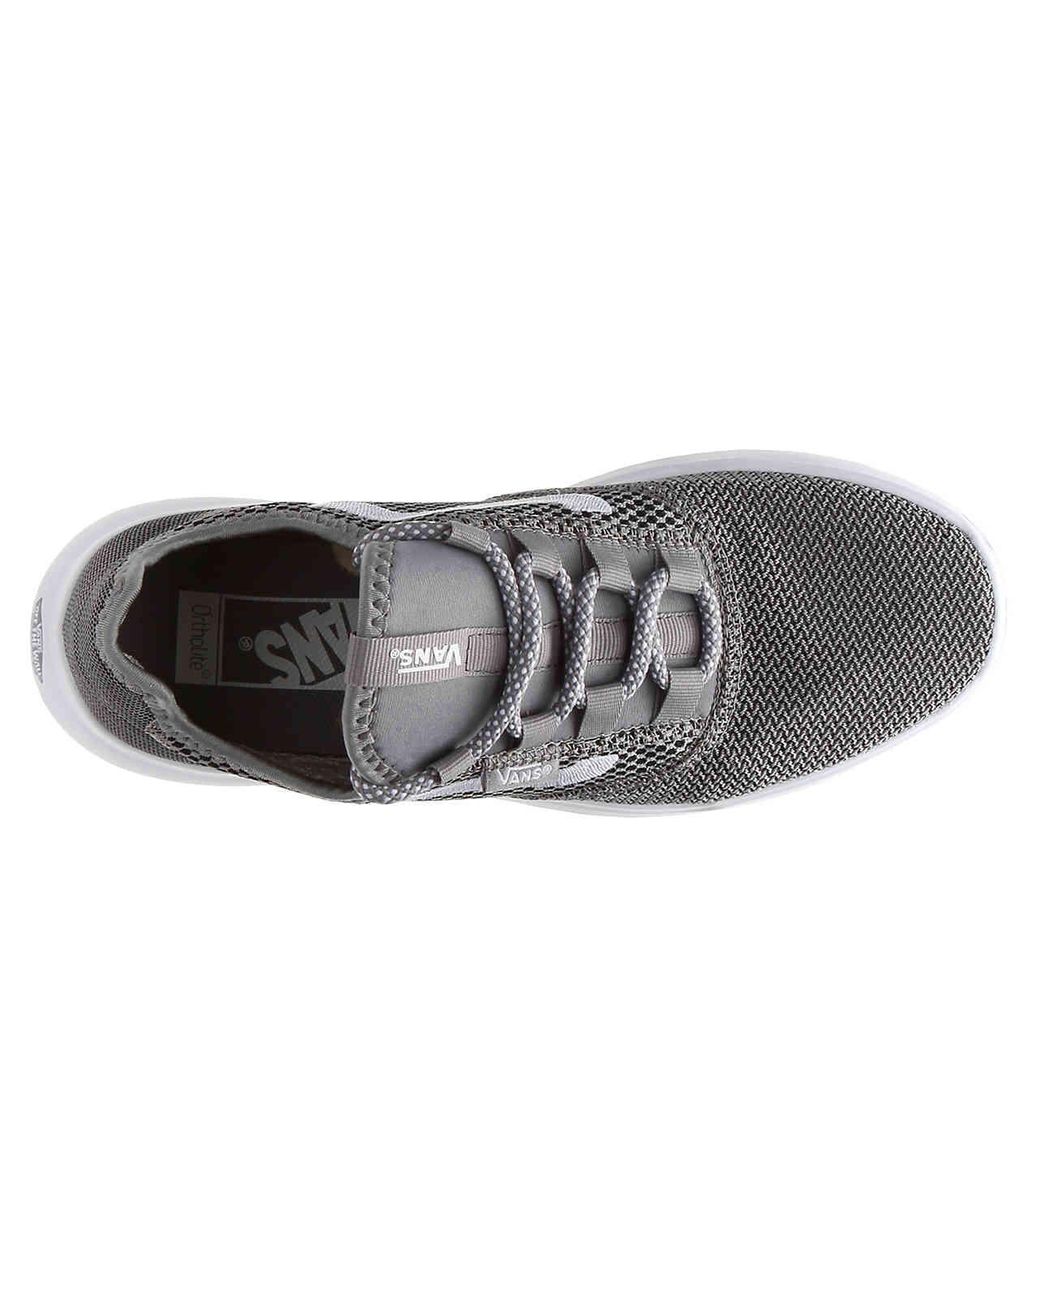 Vans Synthetic Cerus Lite Trainers in Grey/White (Gray) for Men | Lyst